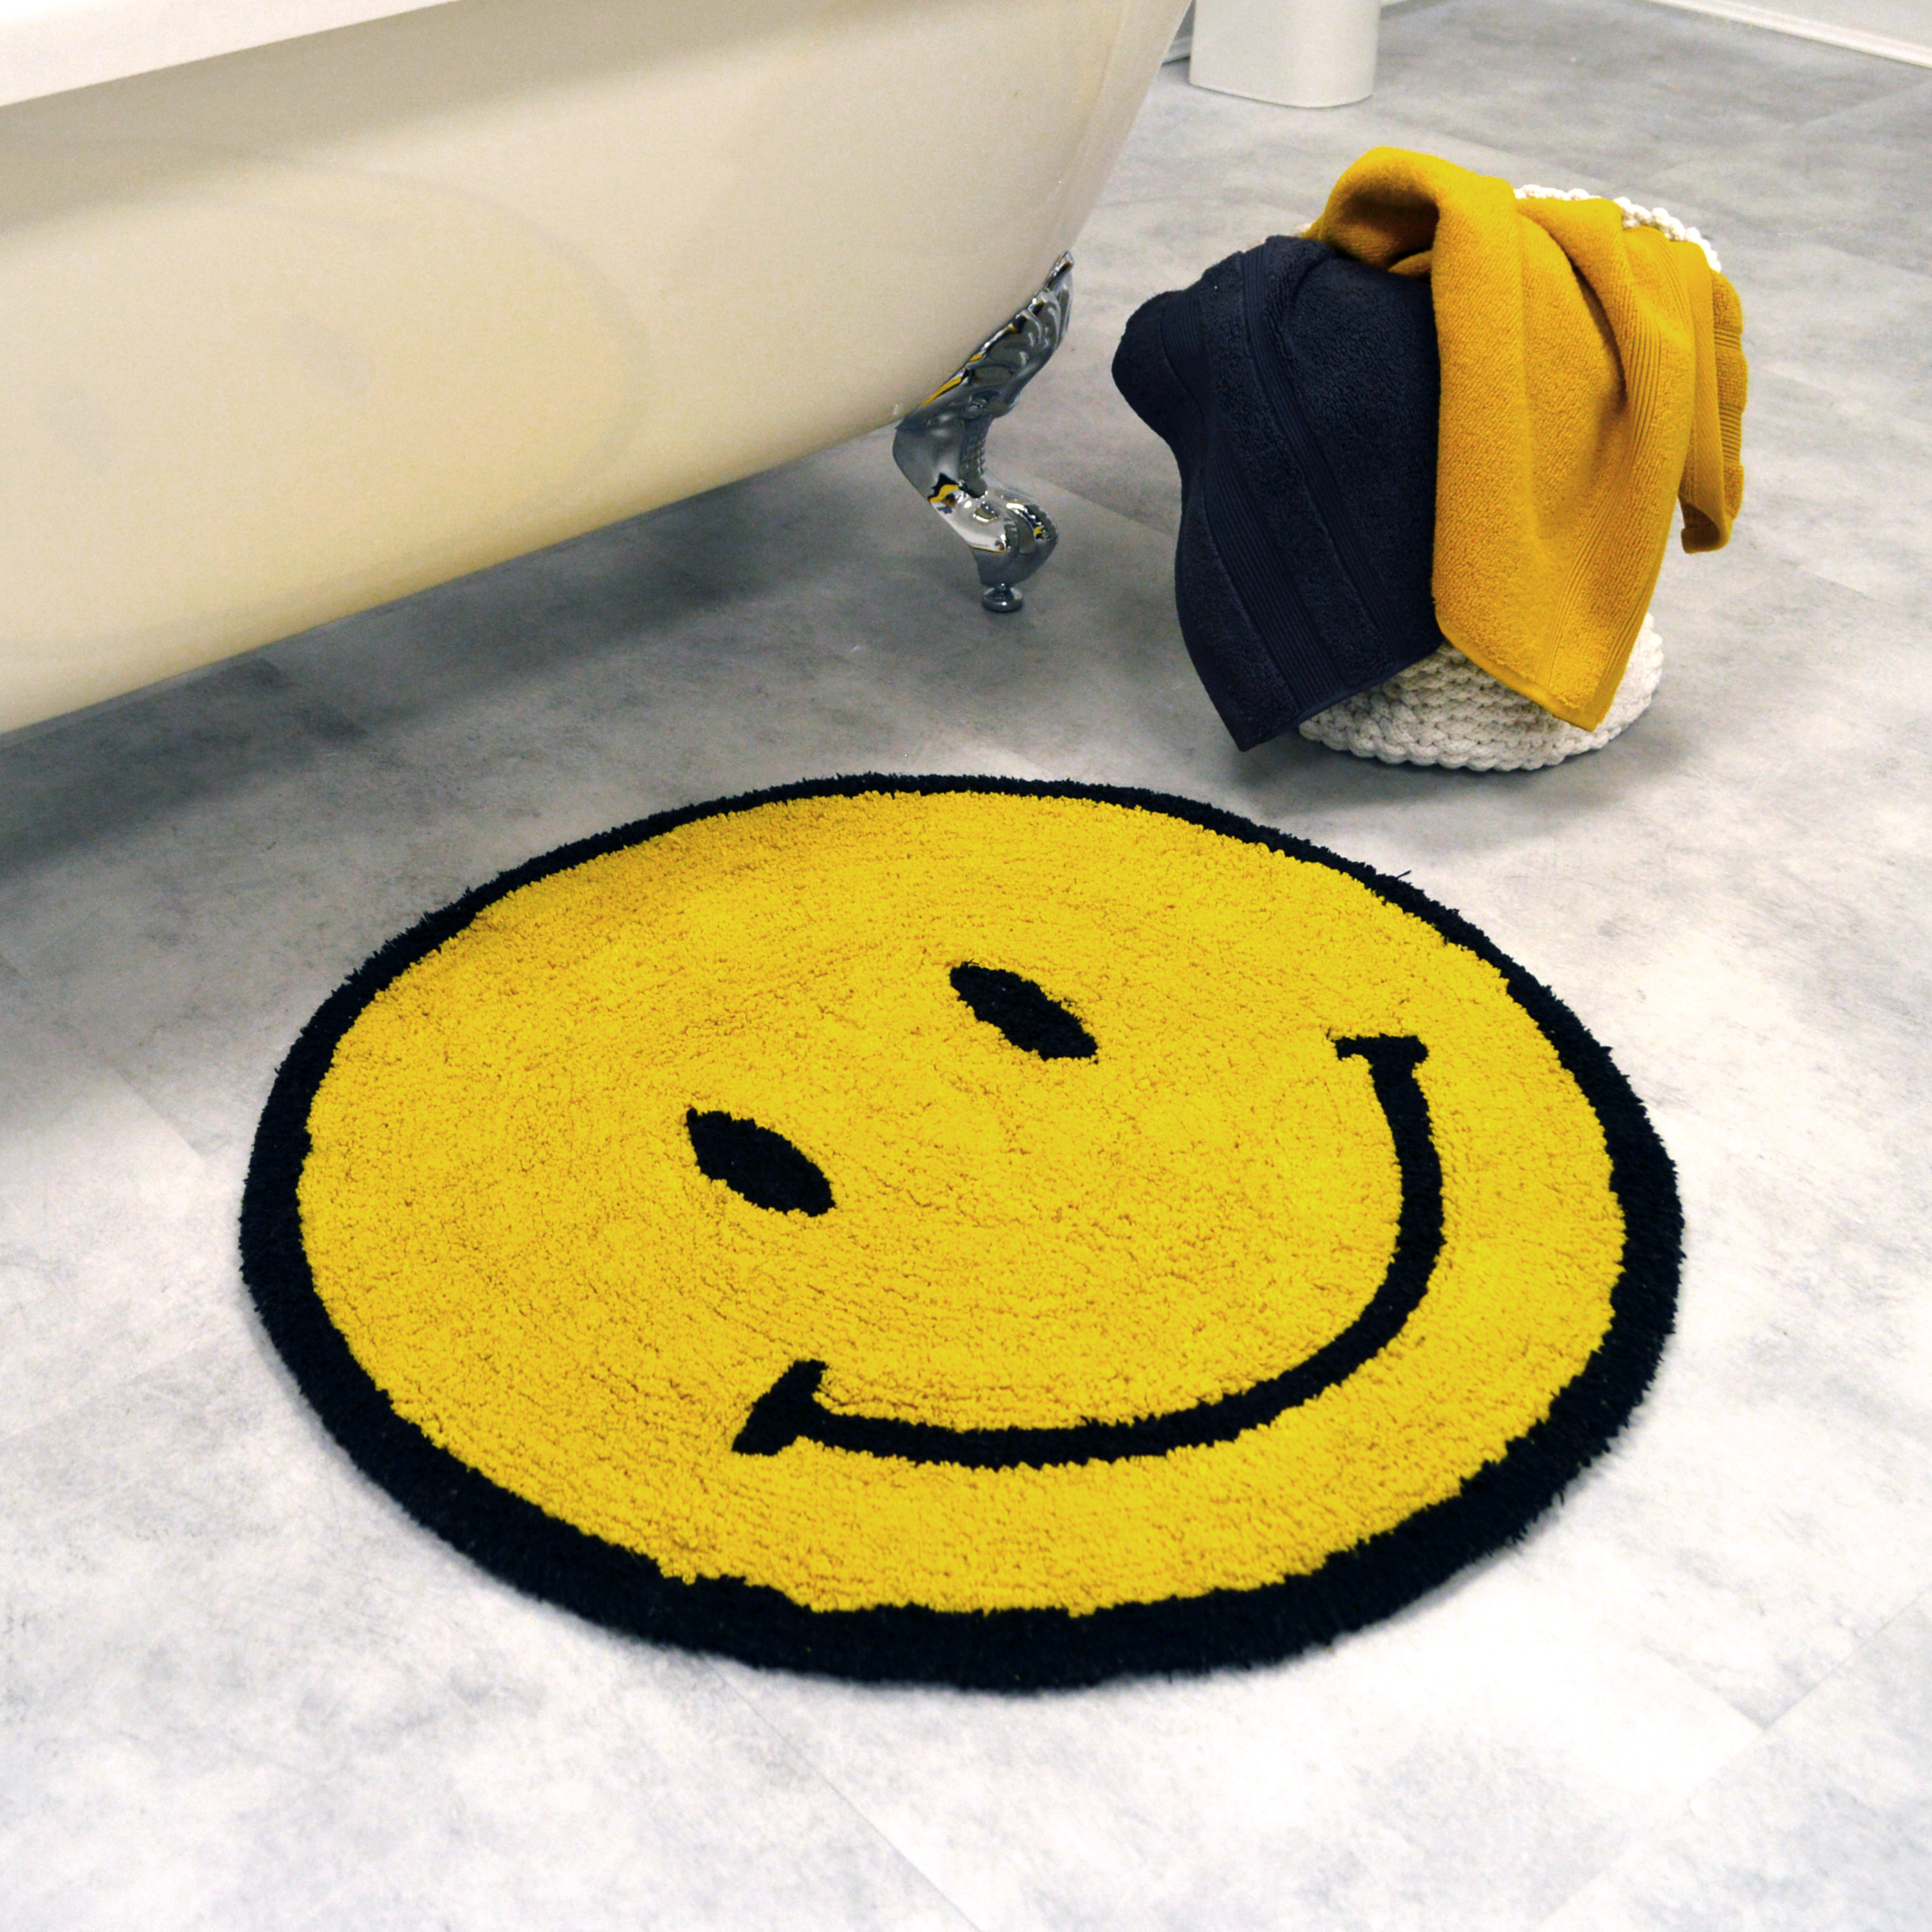 yellow bath mat with a smile